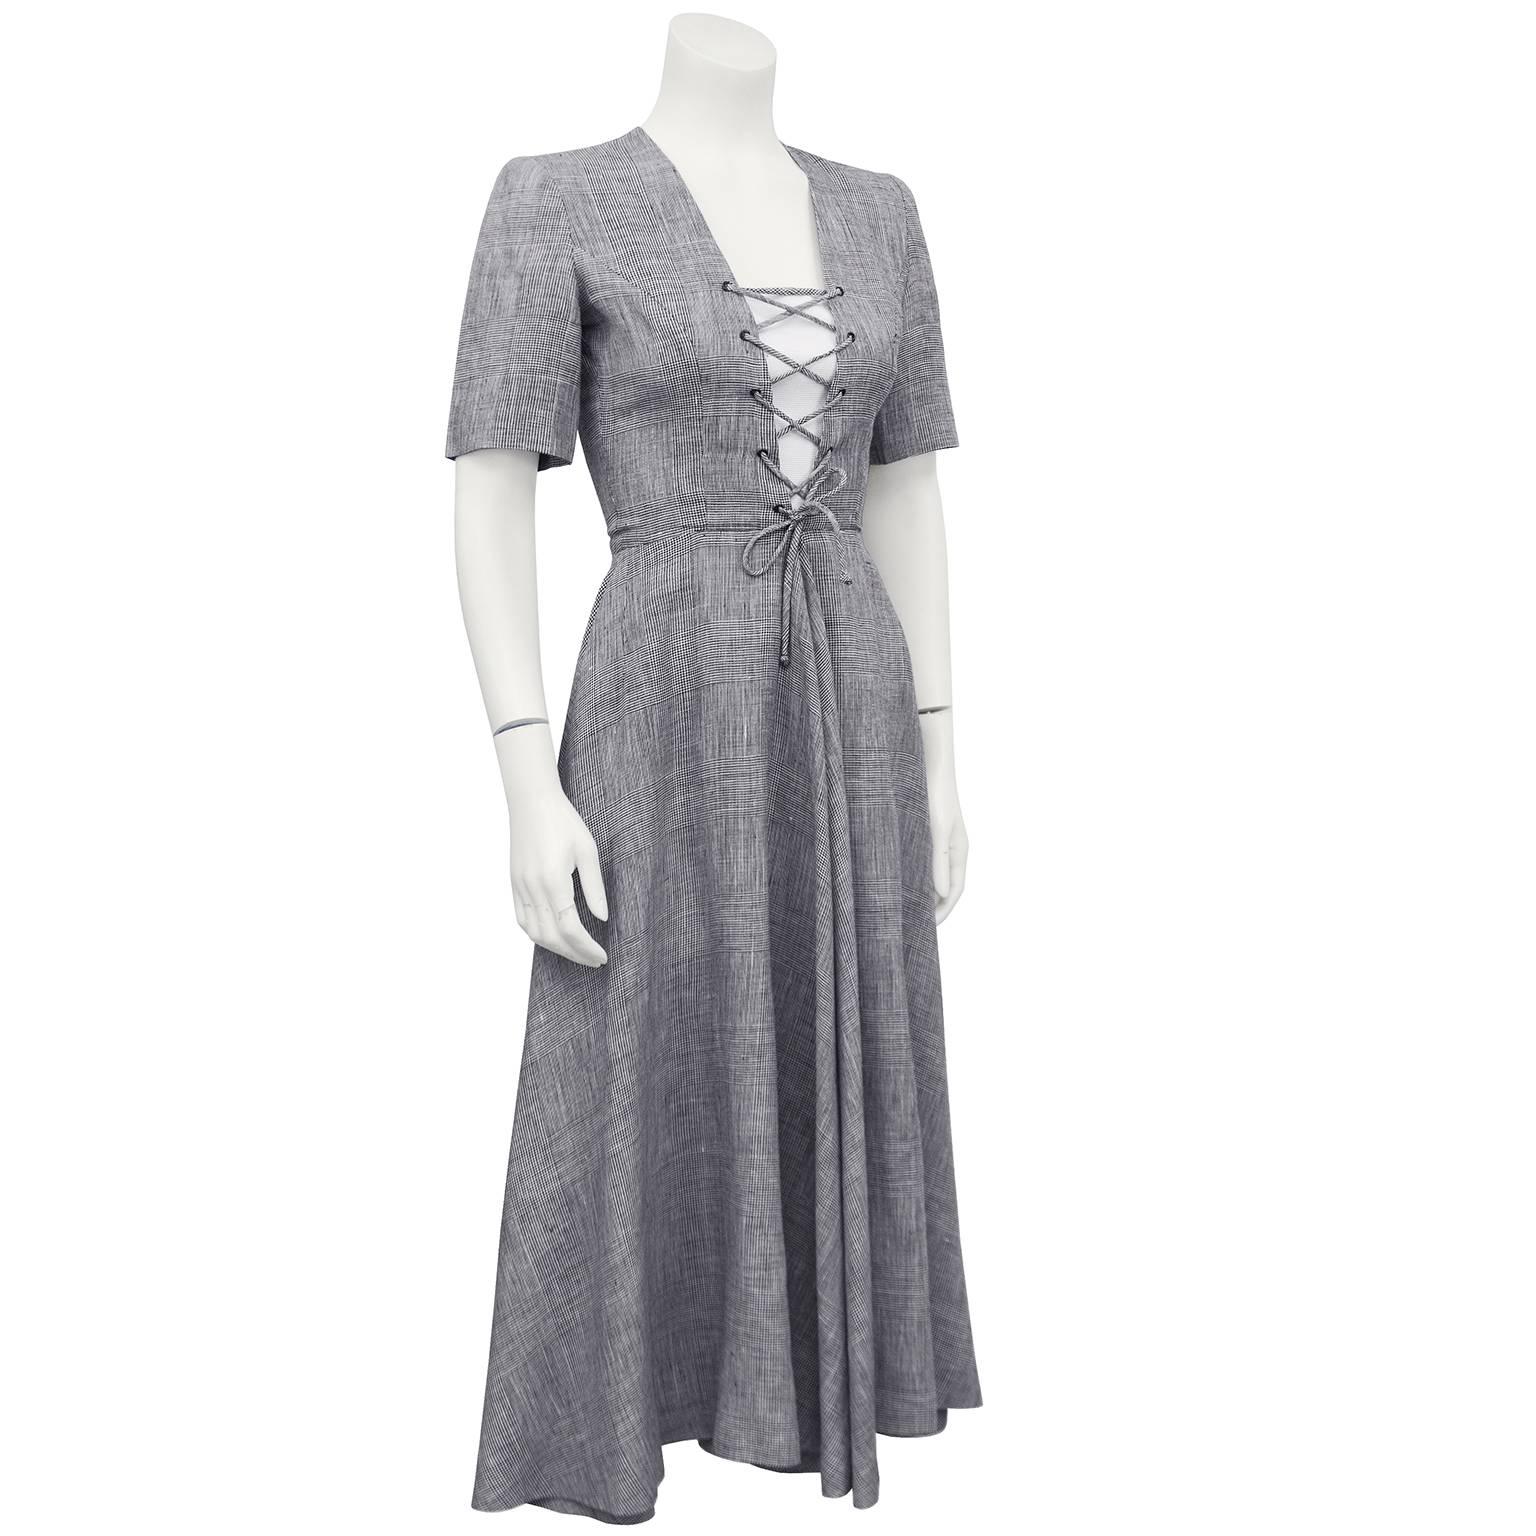 Lanvin gray daydress from the 1970s. The fabric is a miniature houndstooth pattern and the front lacing is constructed from matching material. An elegant silhouette, the short sleeved dress is fitted through the bust and the midi length skirt flares